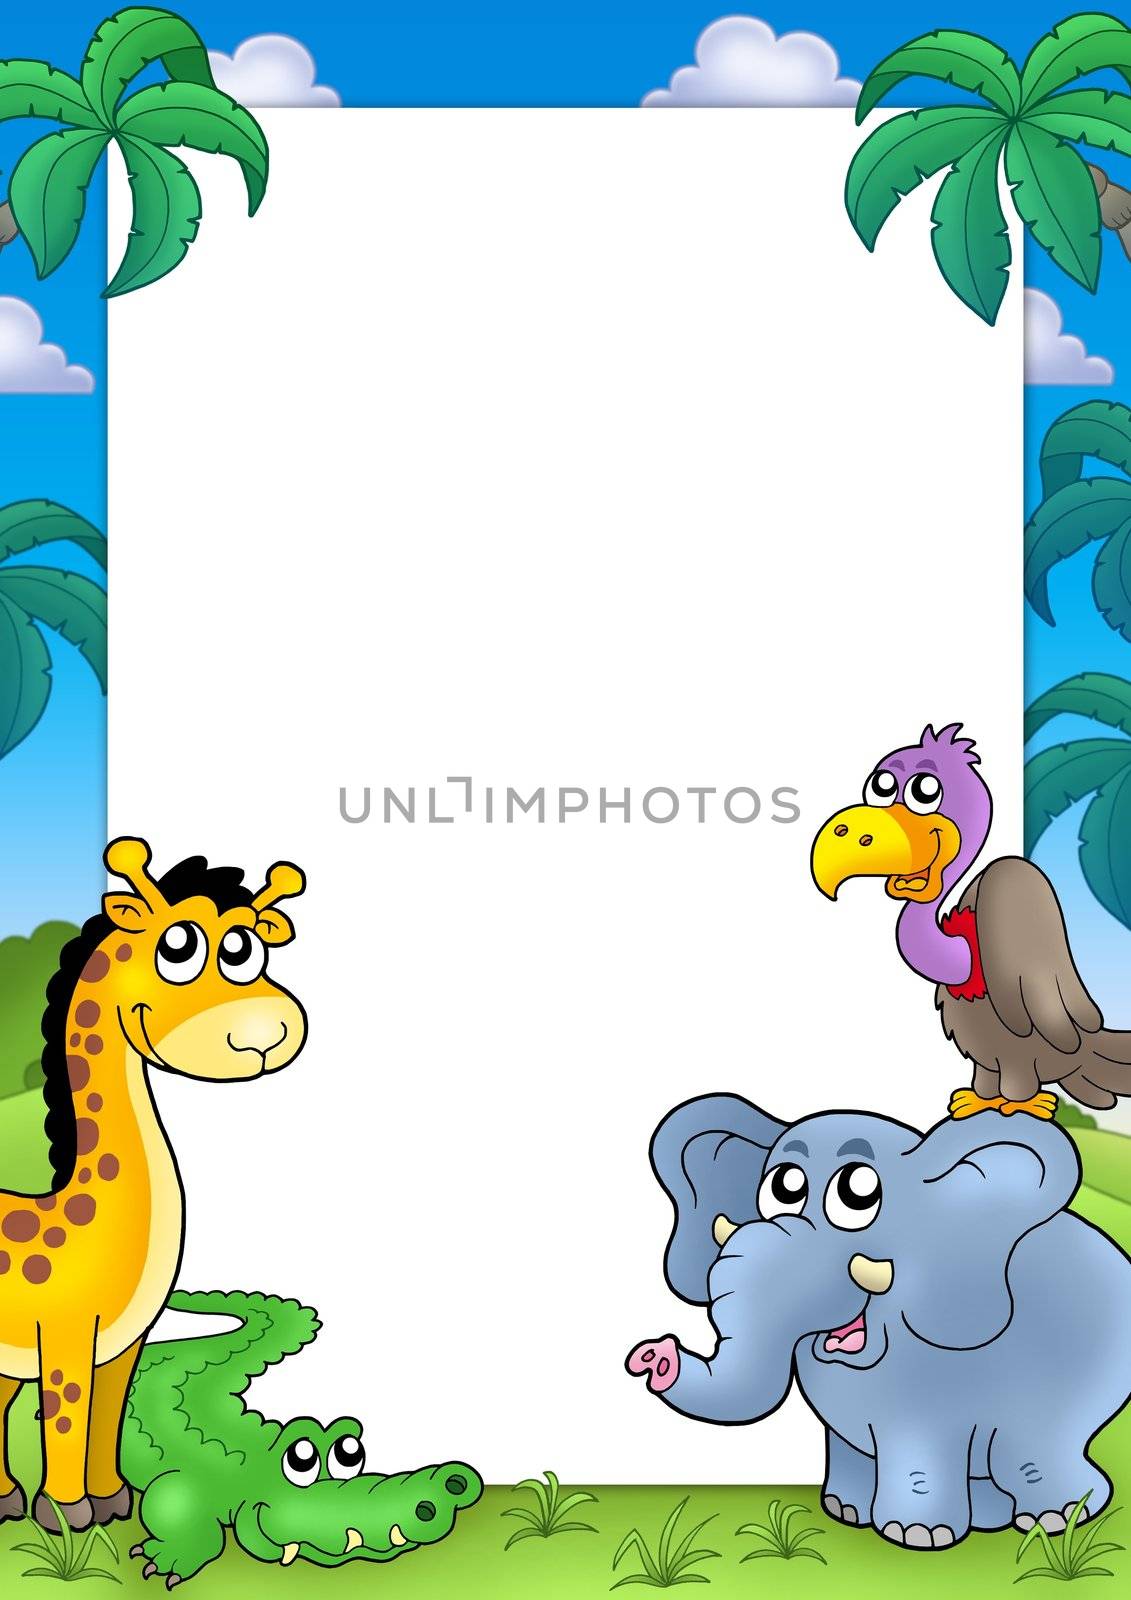 African frame with animals 1 - color illustration.